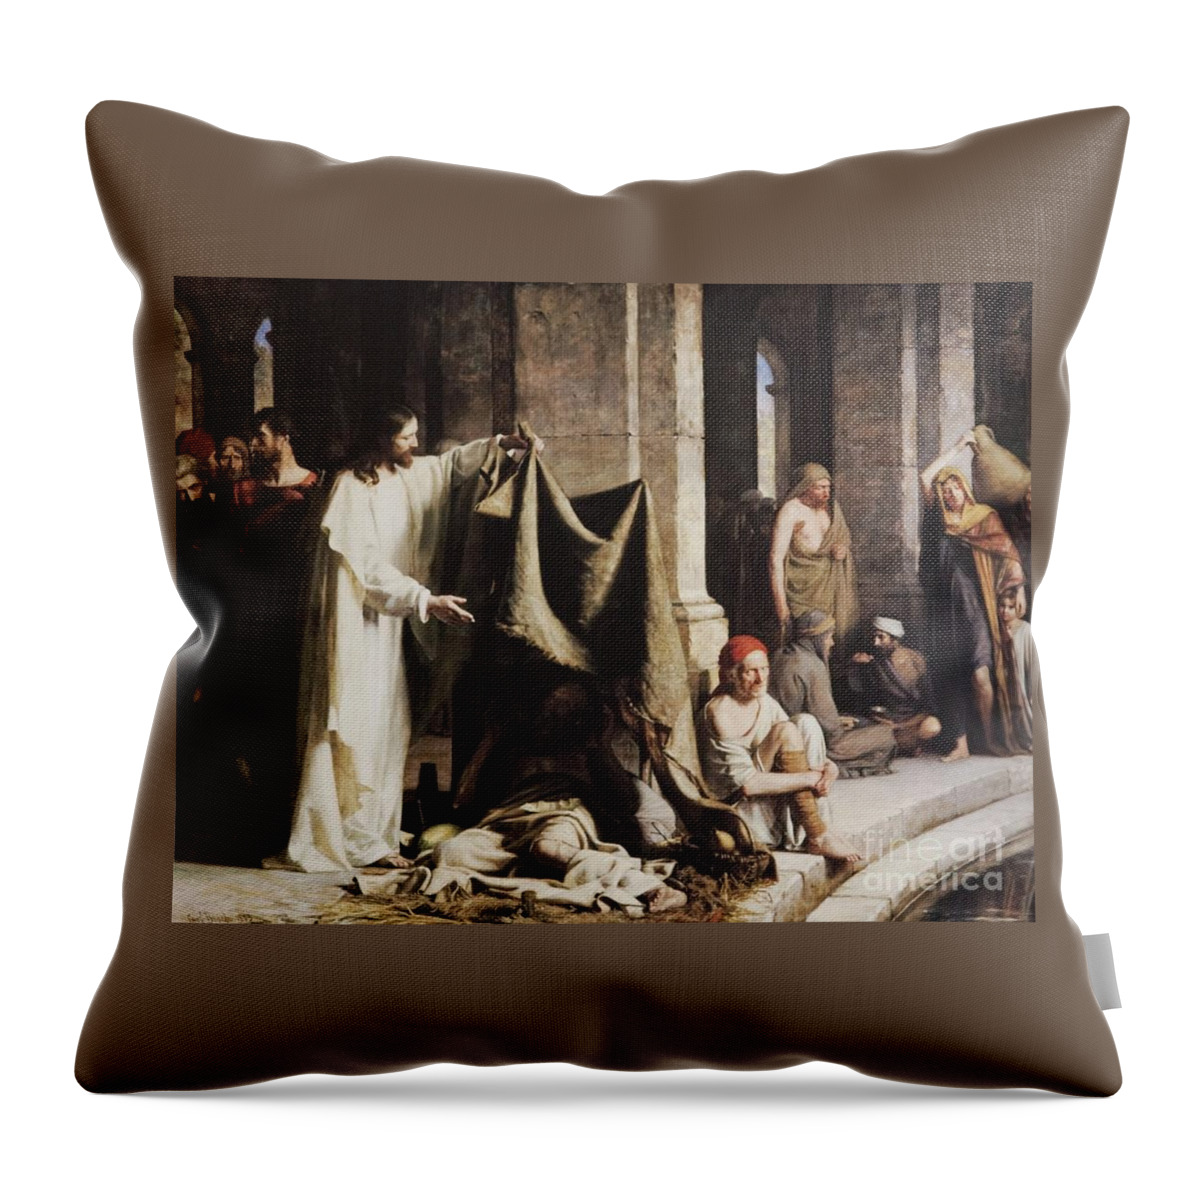 Carl Heinrich Bloch Throw Pillow featuring the painting Christ Healing The Sick At The Pool Of Bethesda by Carl Heinrich Bloch